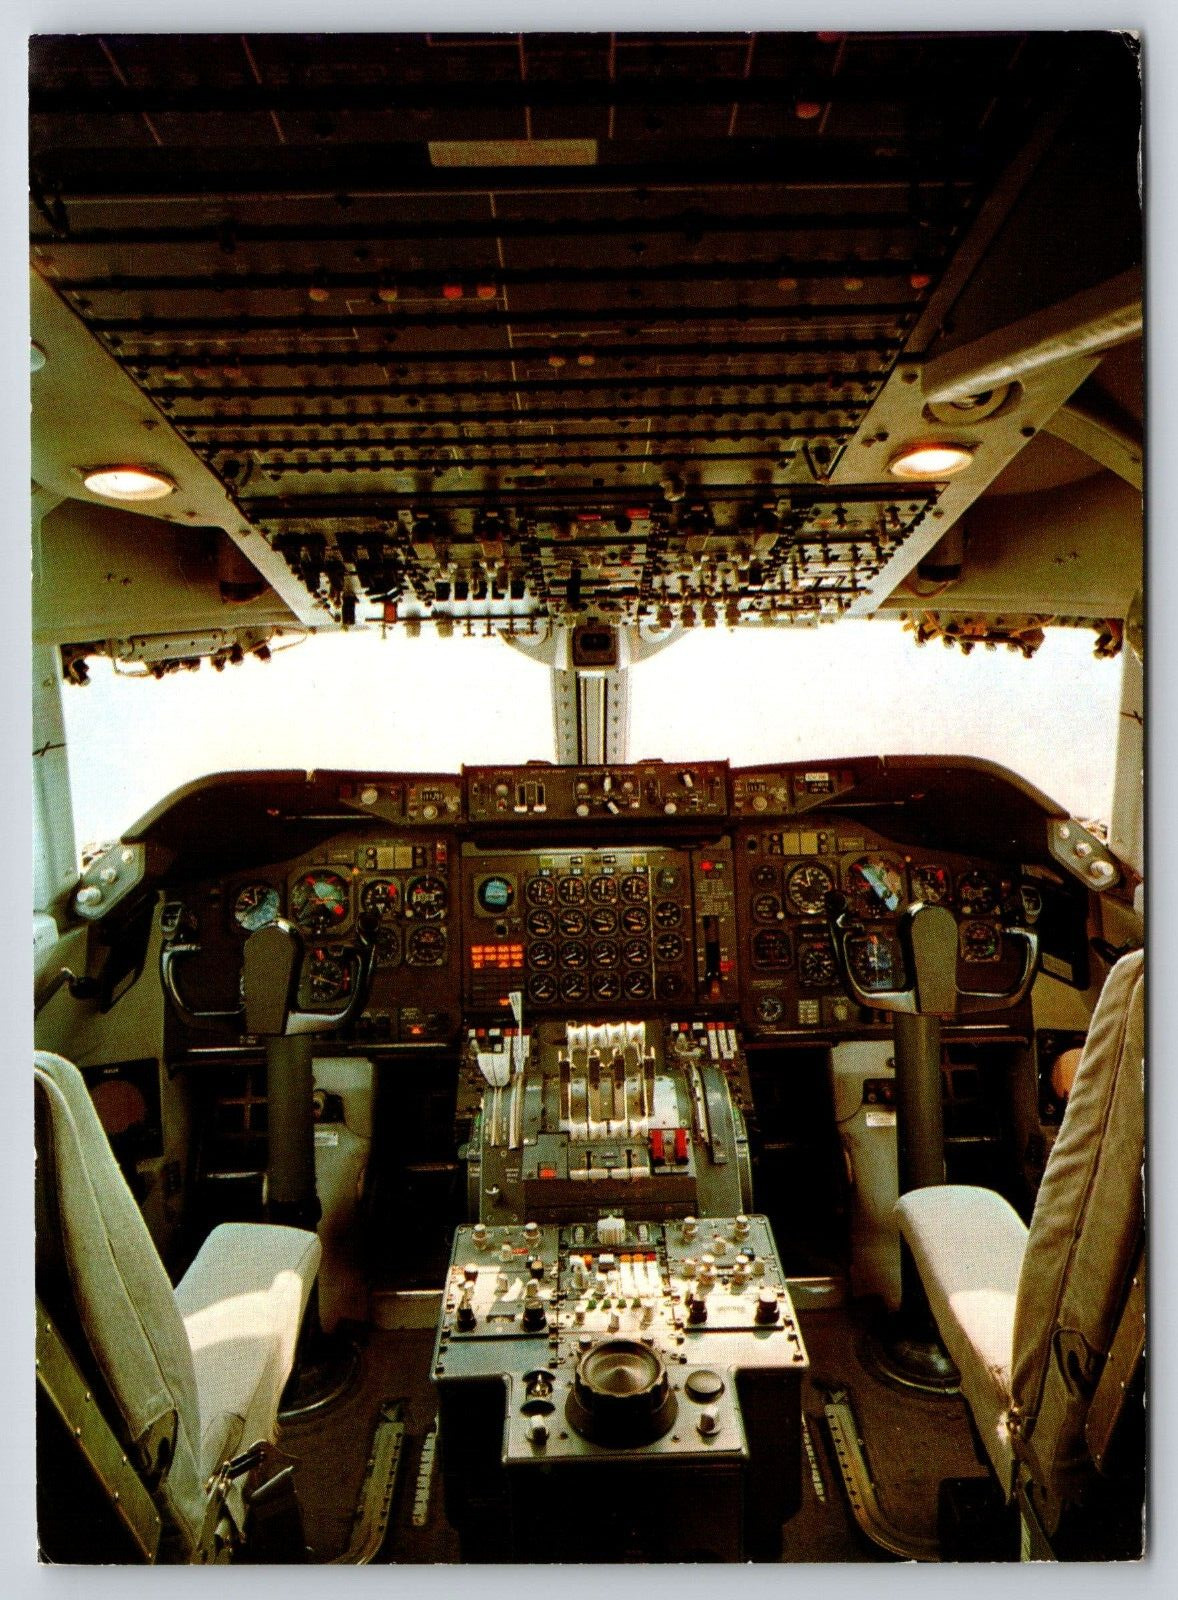 Japan Air Lines Postcard B-747 Aircraft Airlines Cockpit View 747 Airplane